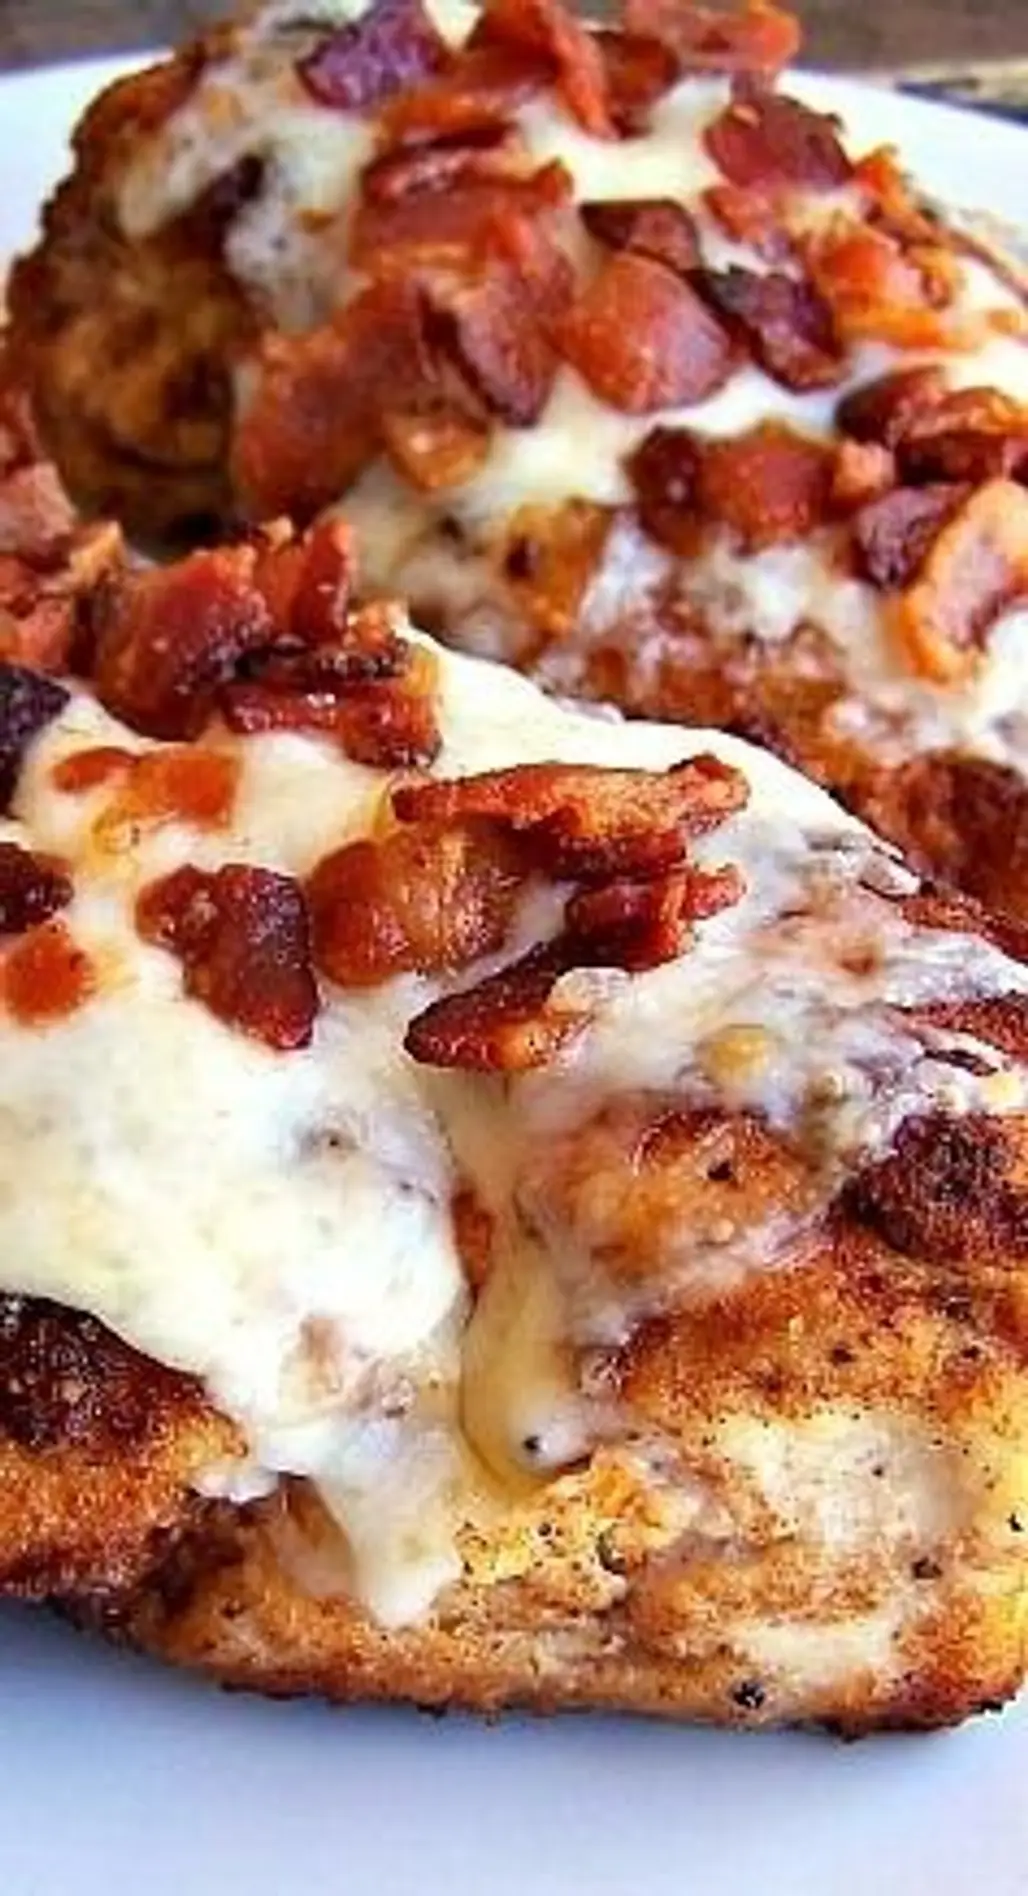 Parmesan Crusted Chicken with Bacon